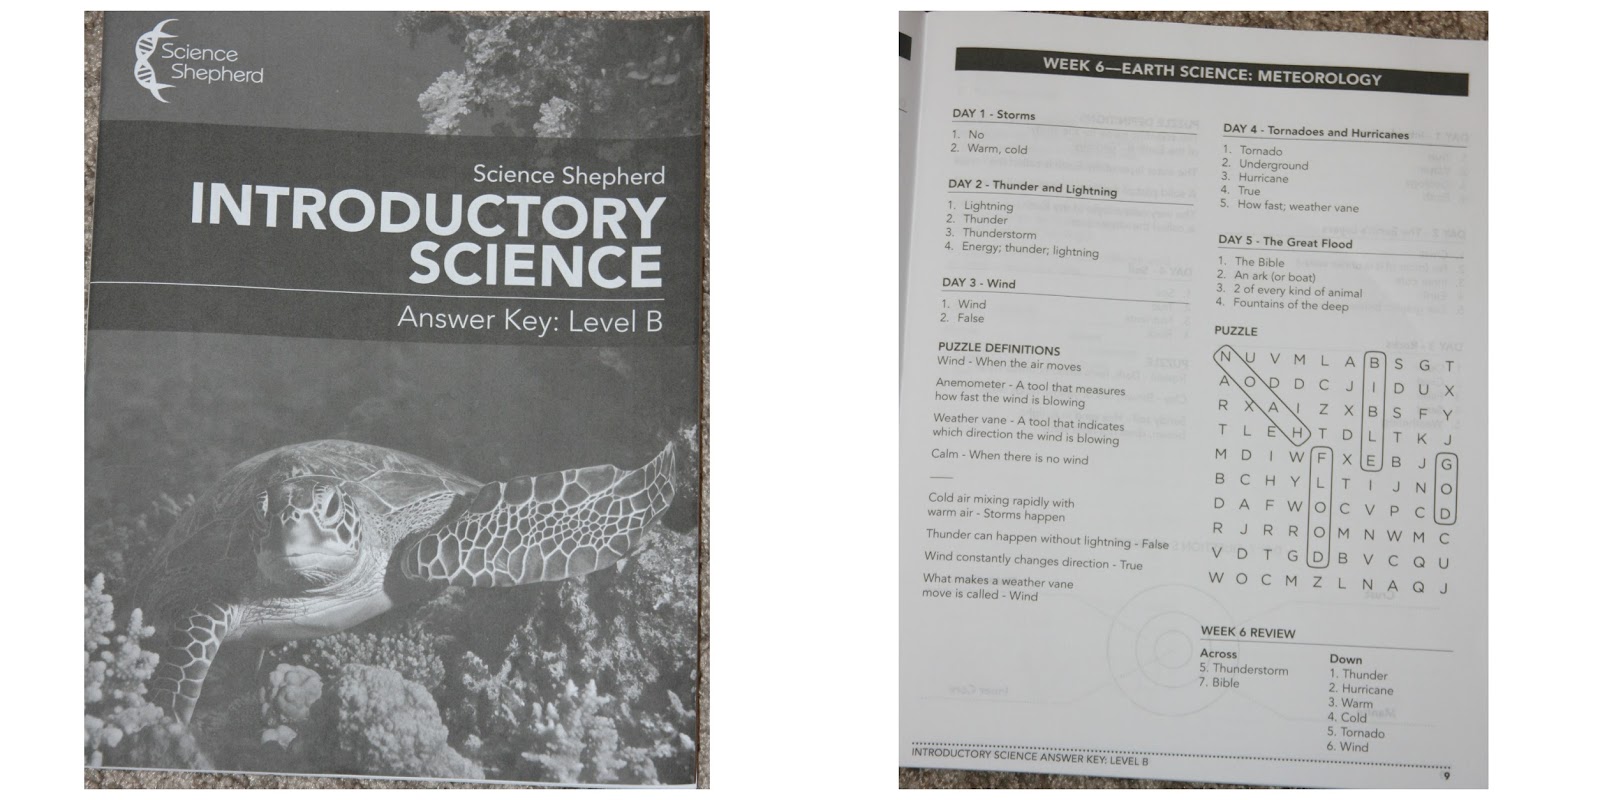 A Learning Journey: TOS Review: Introductory Science from Science Shepherd